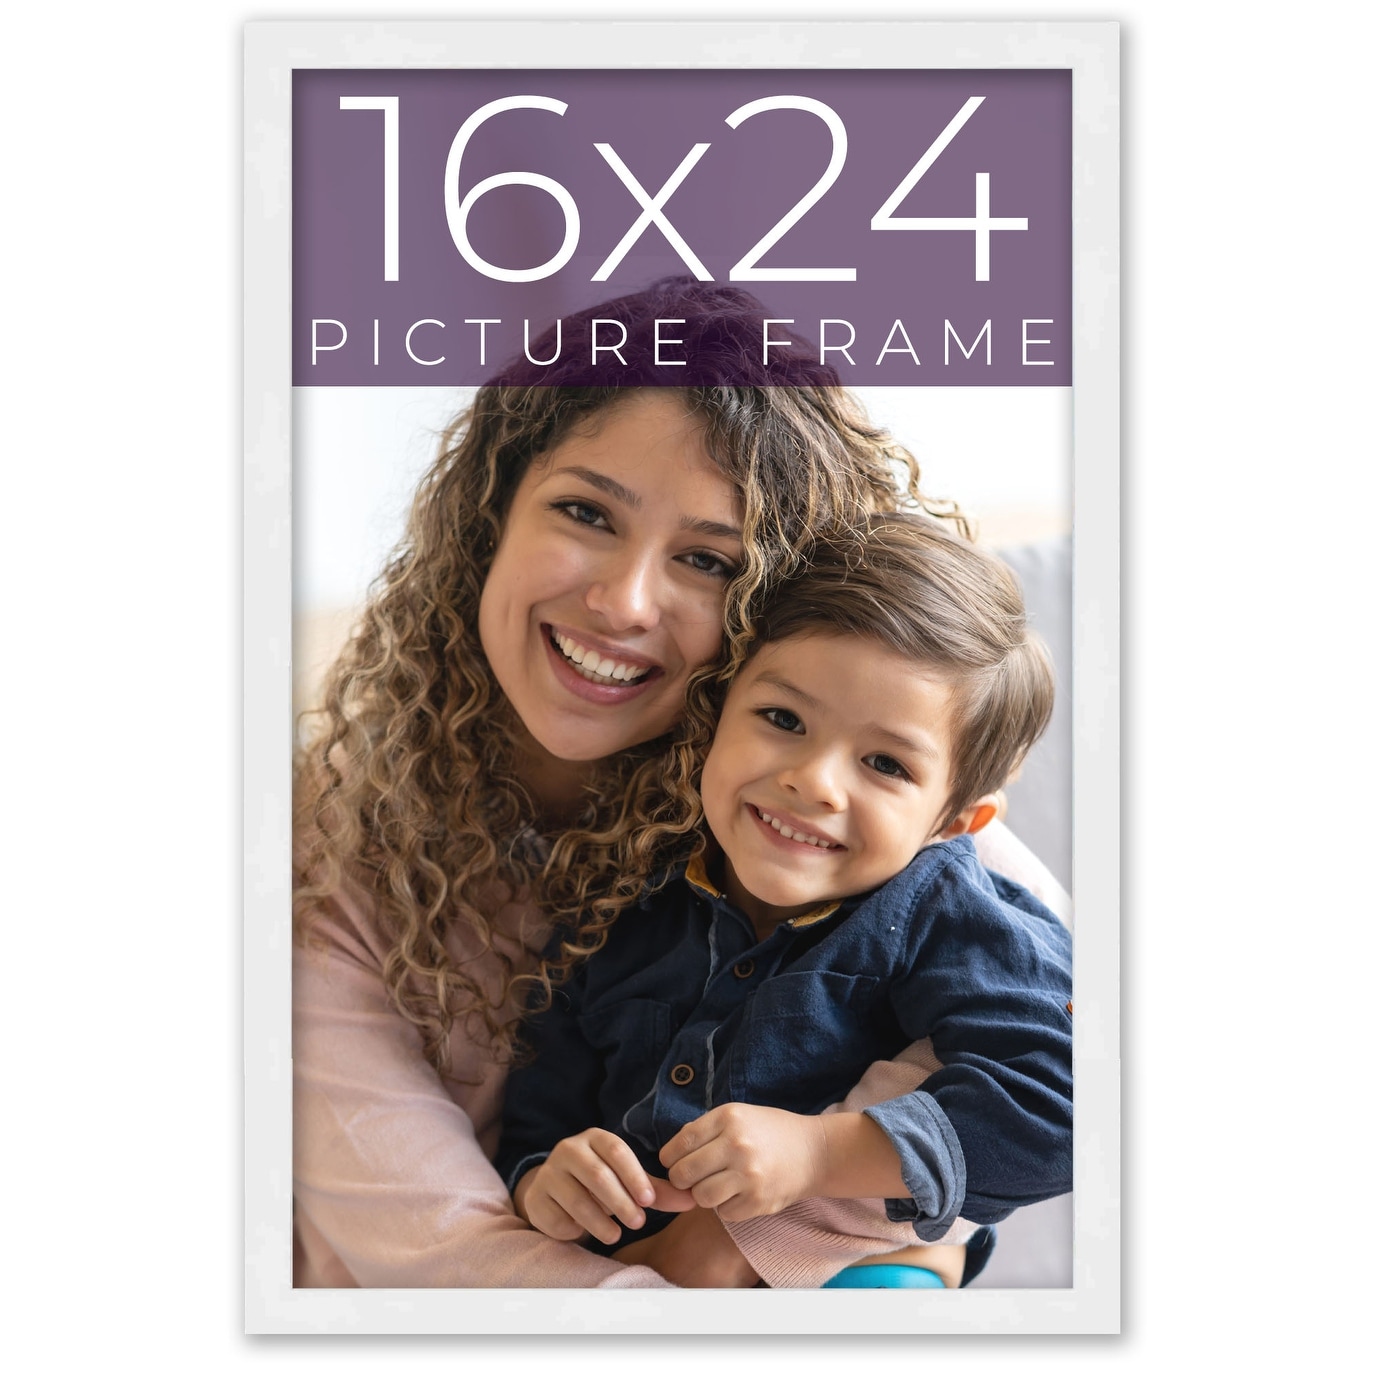 16x24 Picture Frame - Contemporary Picture Frame Complete With UV - On Sale  - Bed Bath & Beyond - 35902950